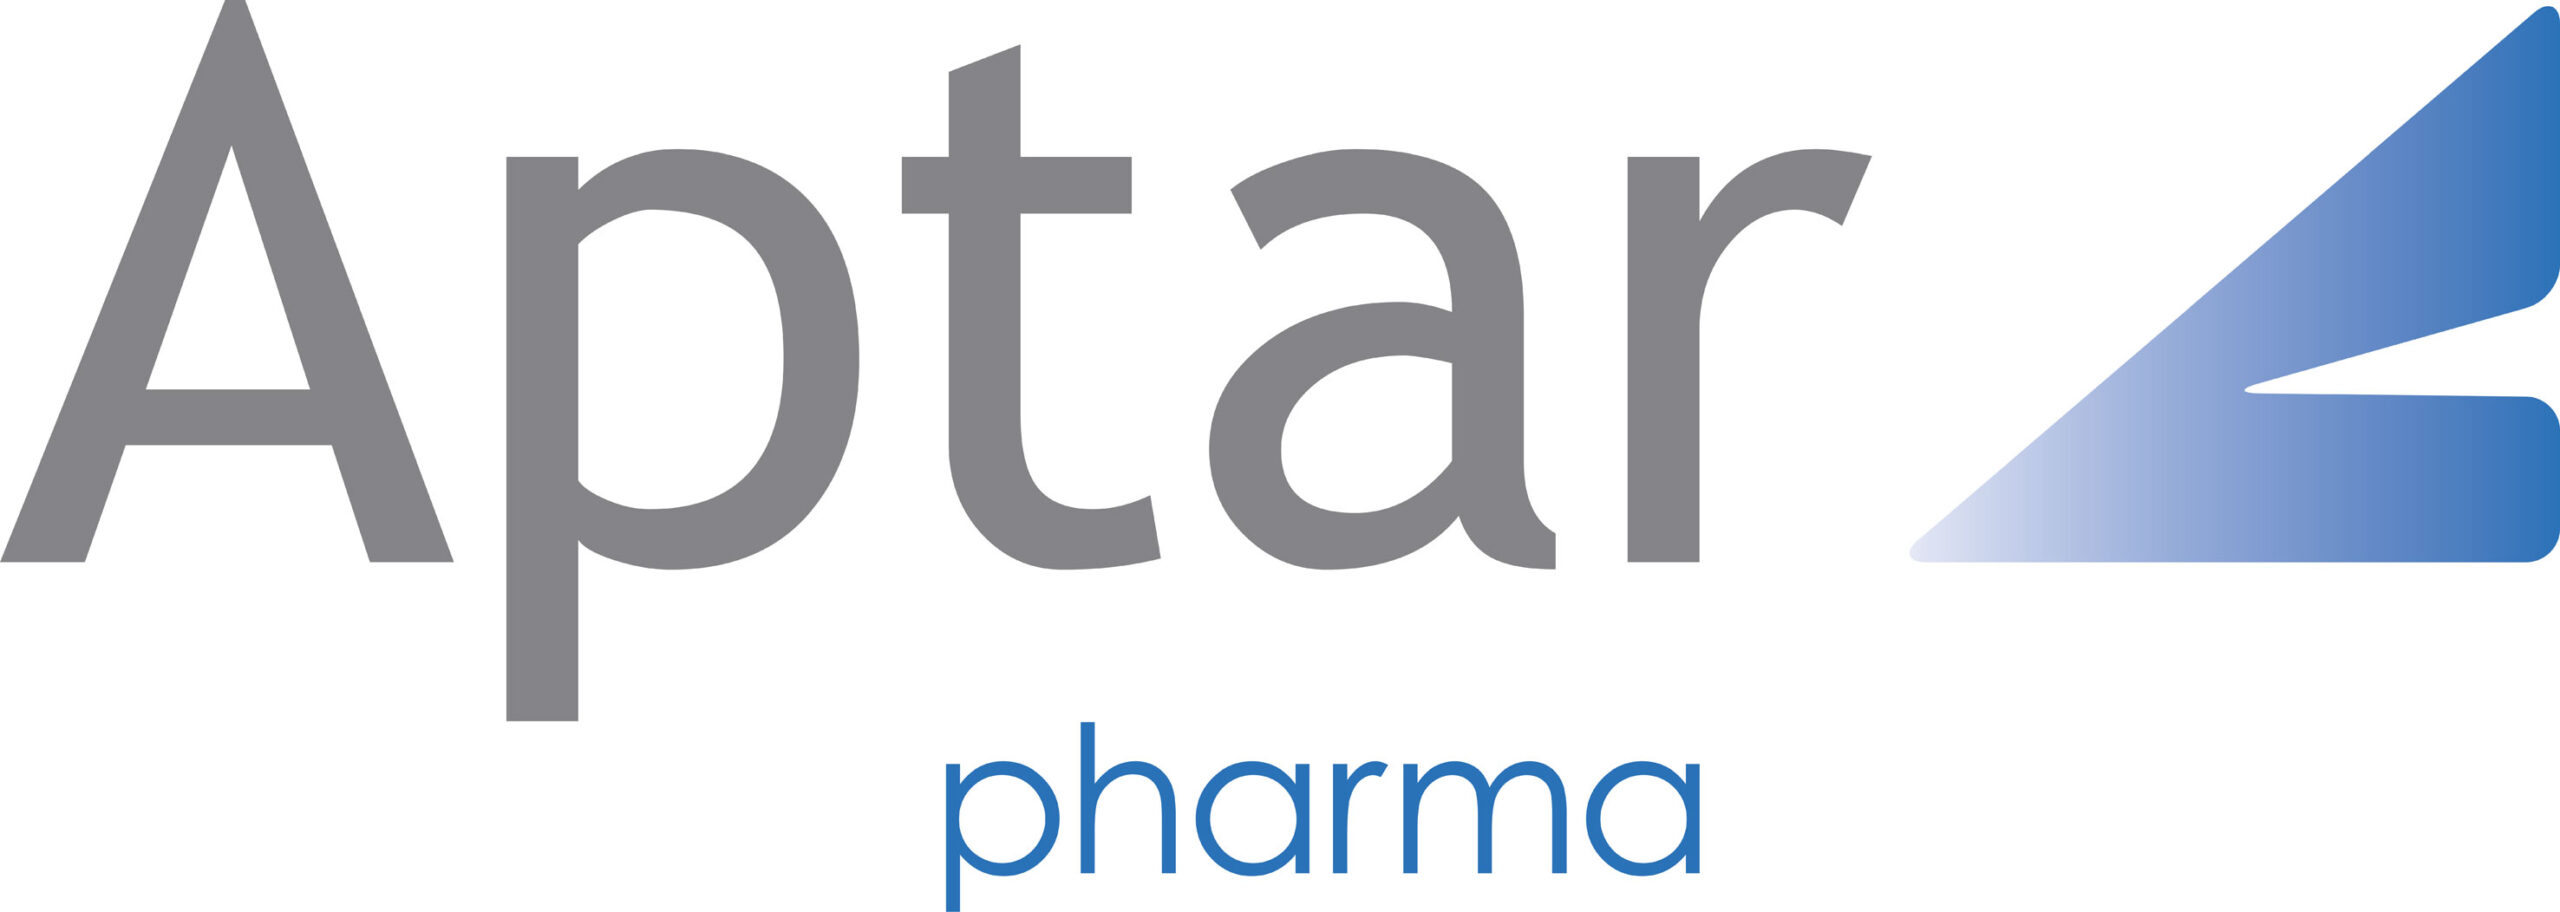 https://www.aptar.com/pharmaceutical/delivery-routes/inhalation/